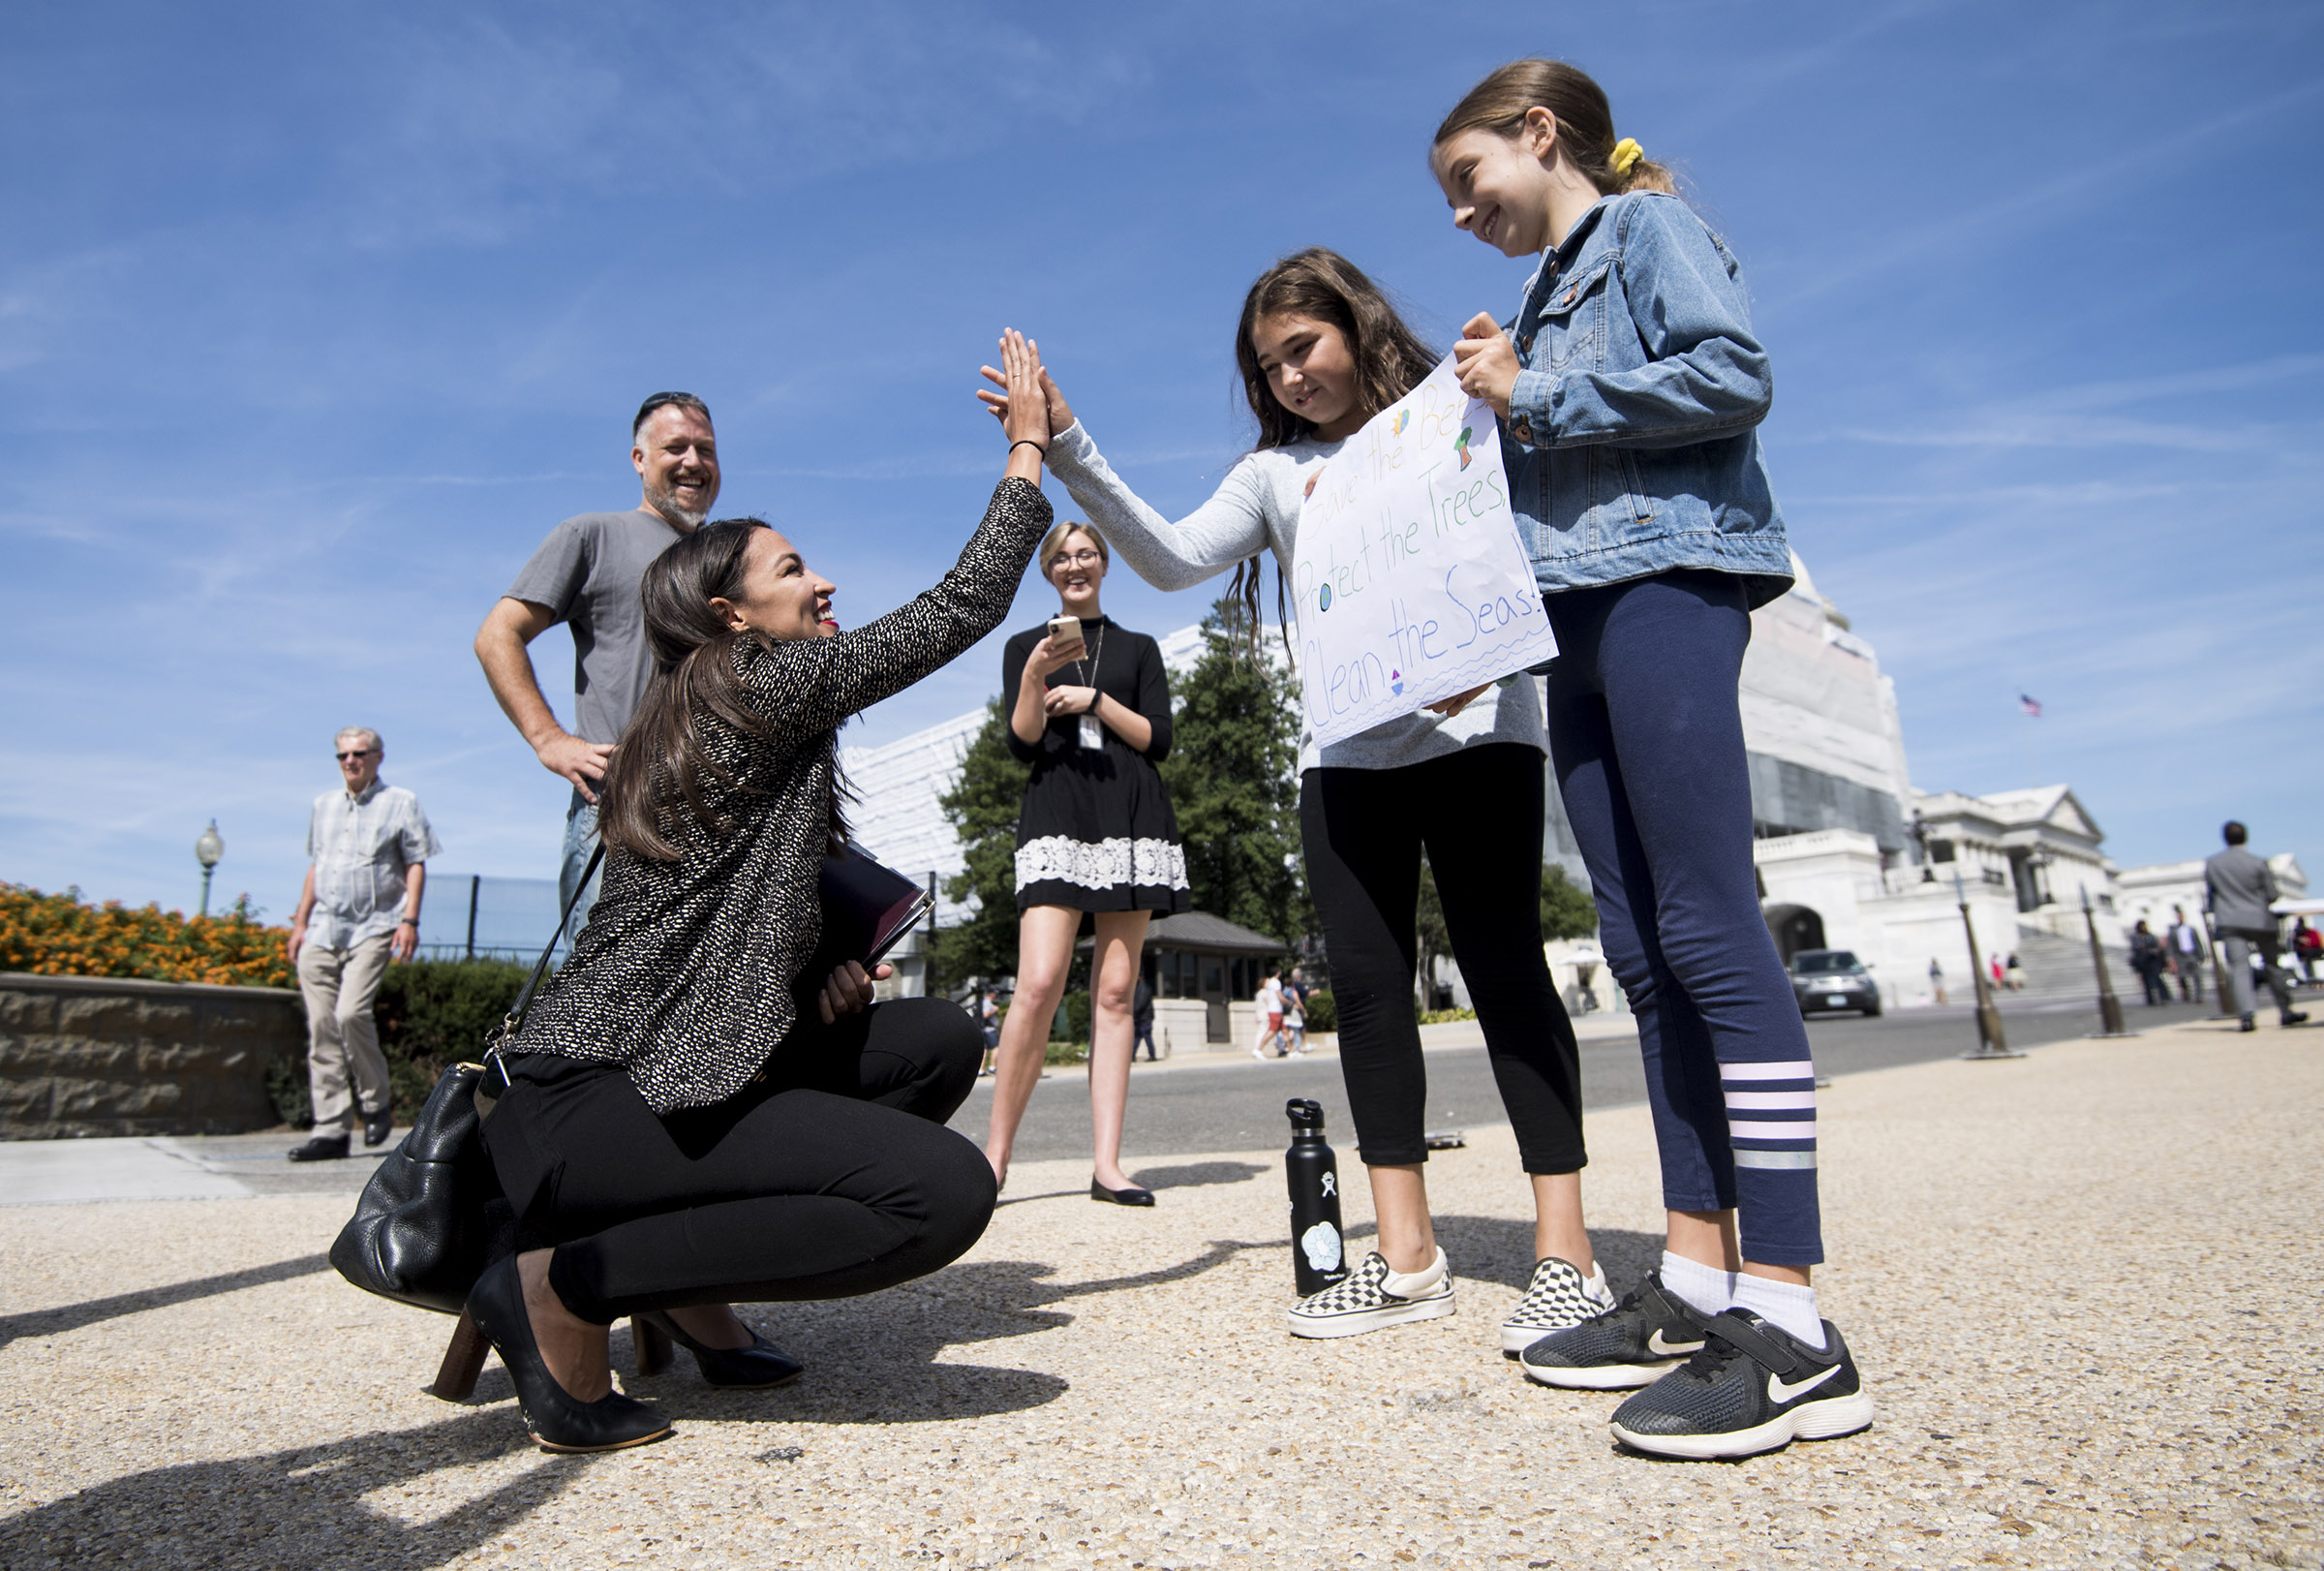 Rep. Alexandria Ocasio-Cortez, D-N.Y., high-fives climate striking students Evelyn Seek, center, and Pema Duncan, right, as they hold their climate strike sign in front of the Capitol on Friday, Sept. 20, 2019. (Bill Clark—CQ-Roll Call via Getty Images)